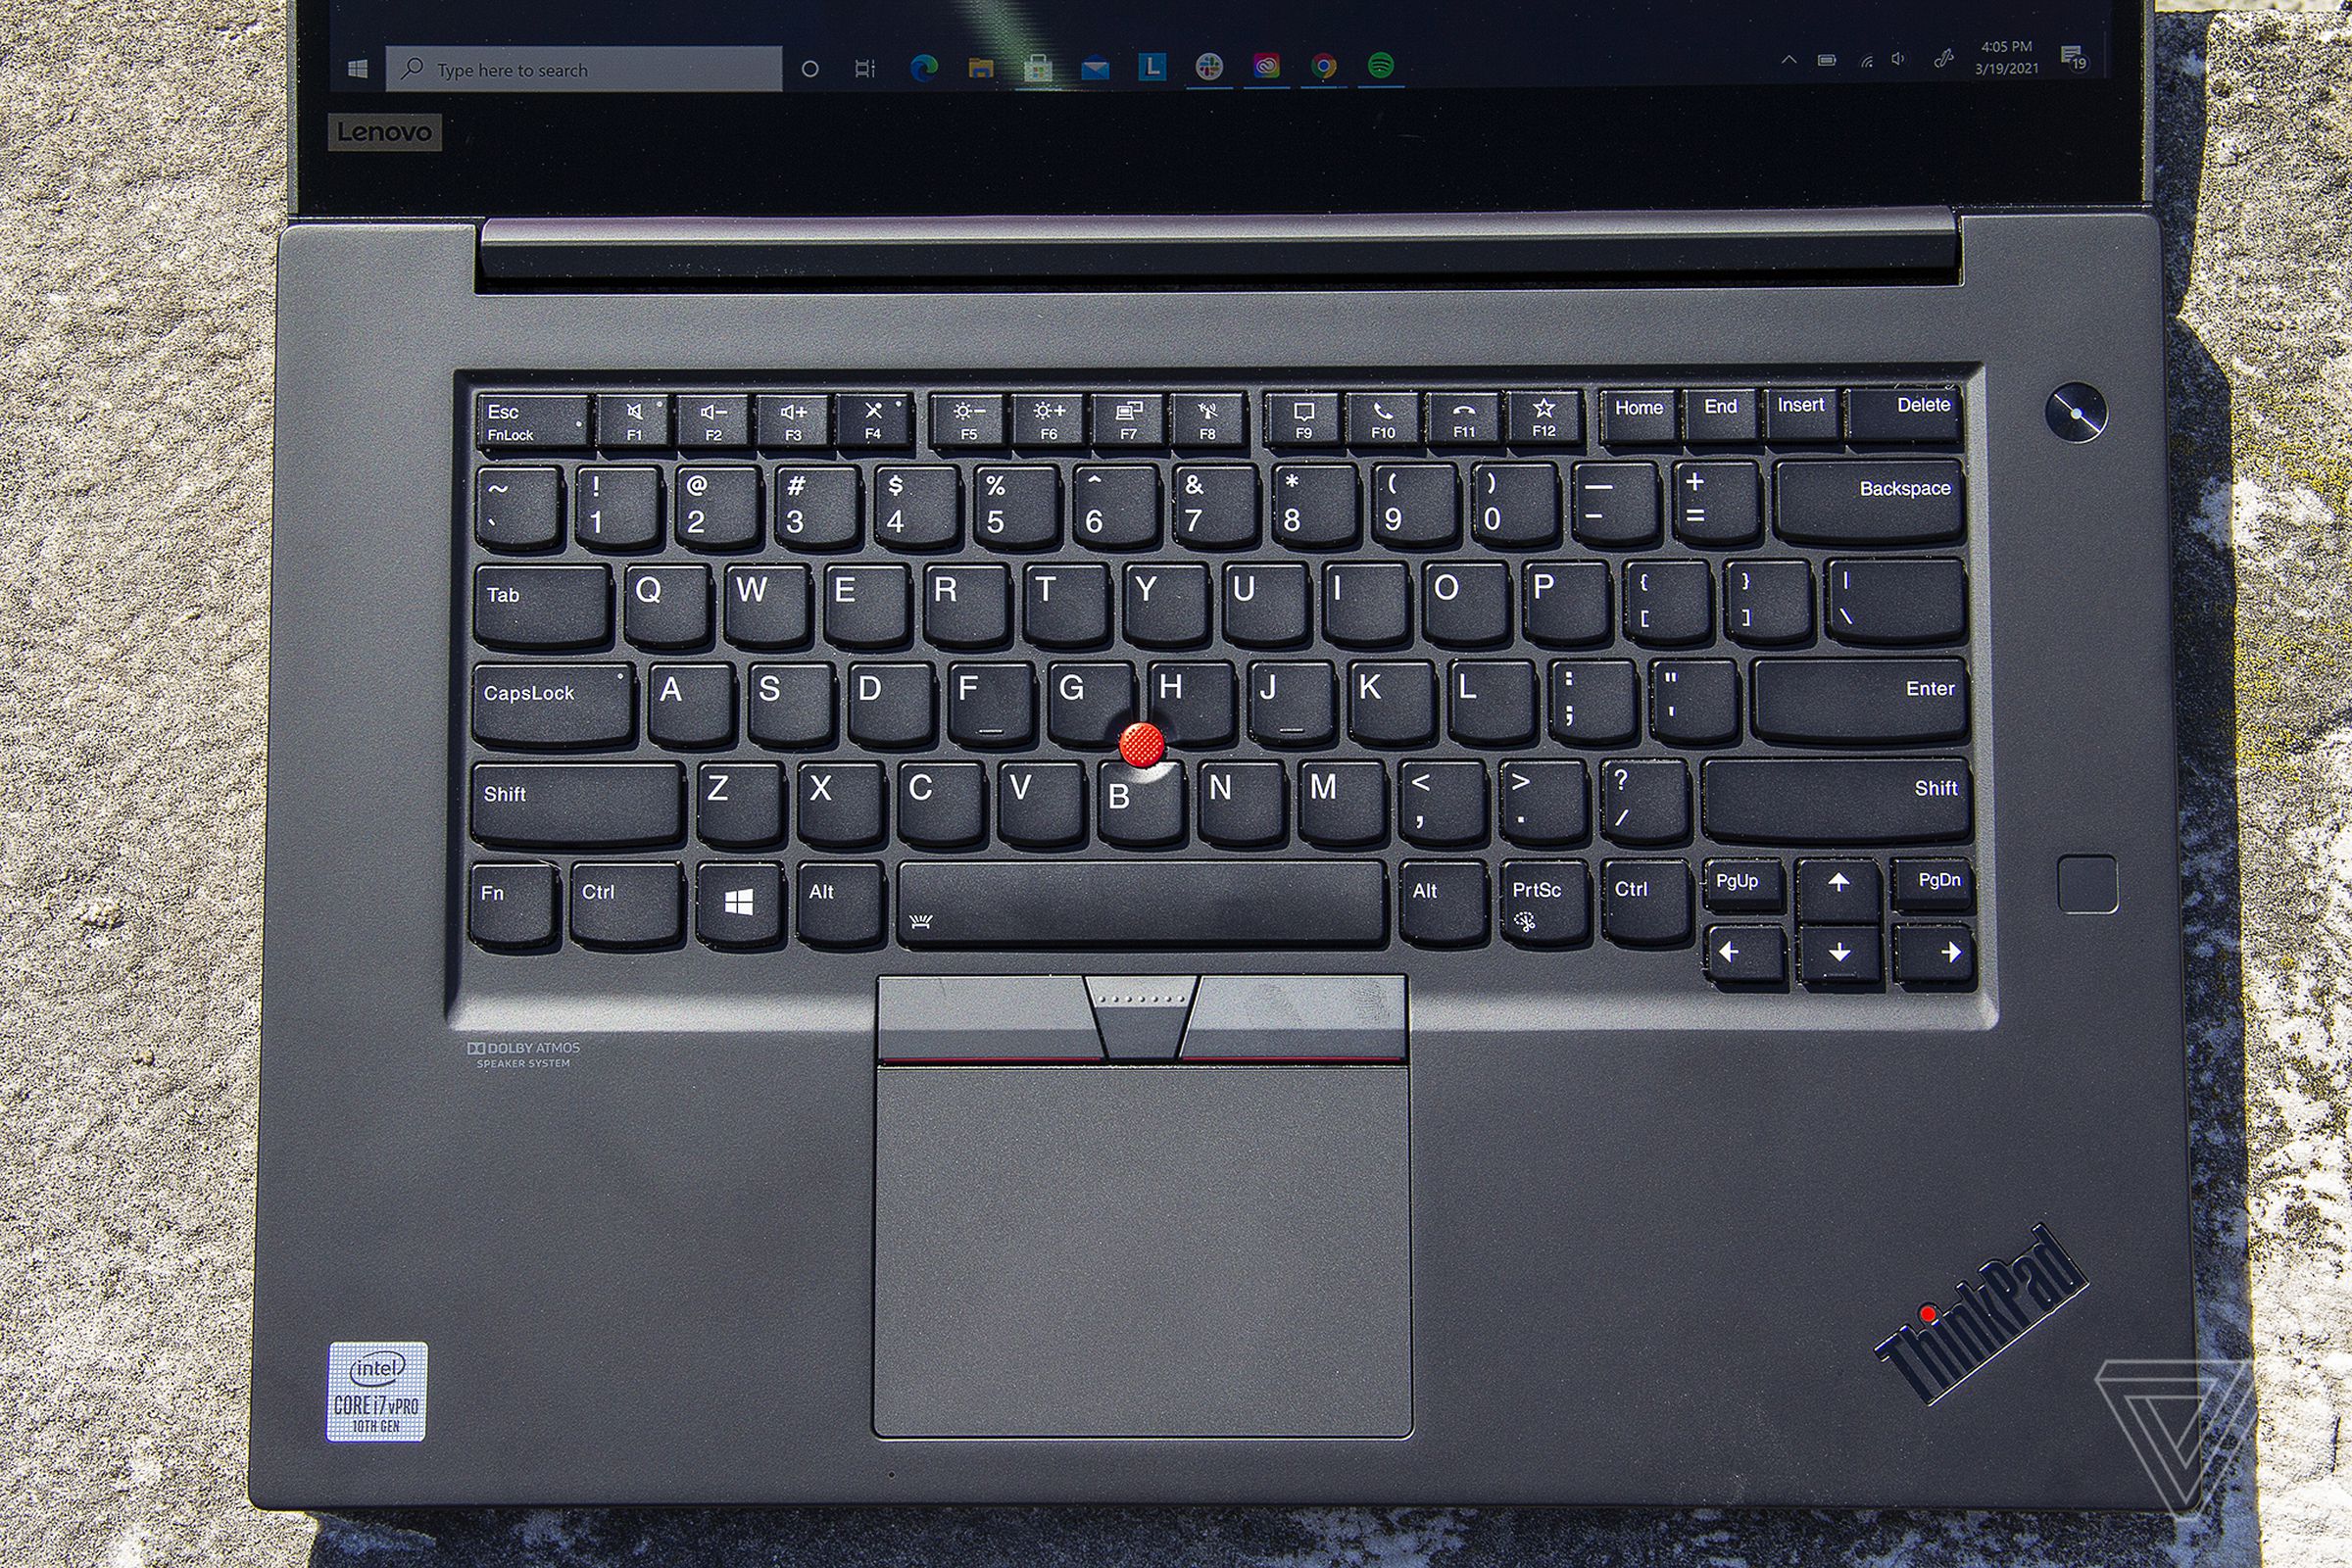 The keyboard and touchpad of the Thinkpad X1 Extreme Gen 3 from above.